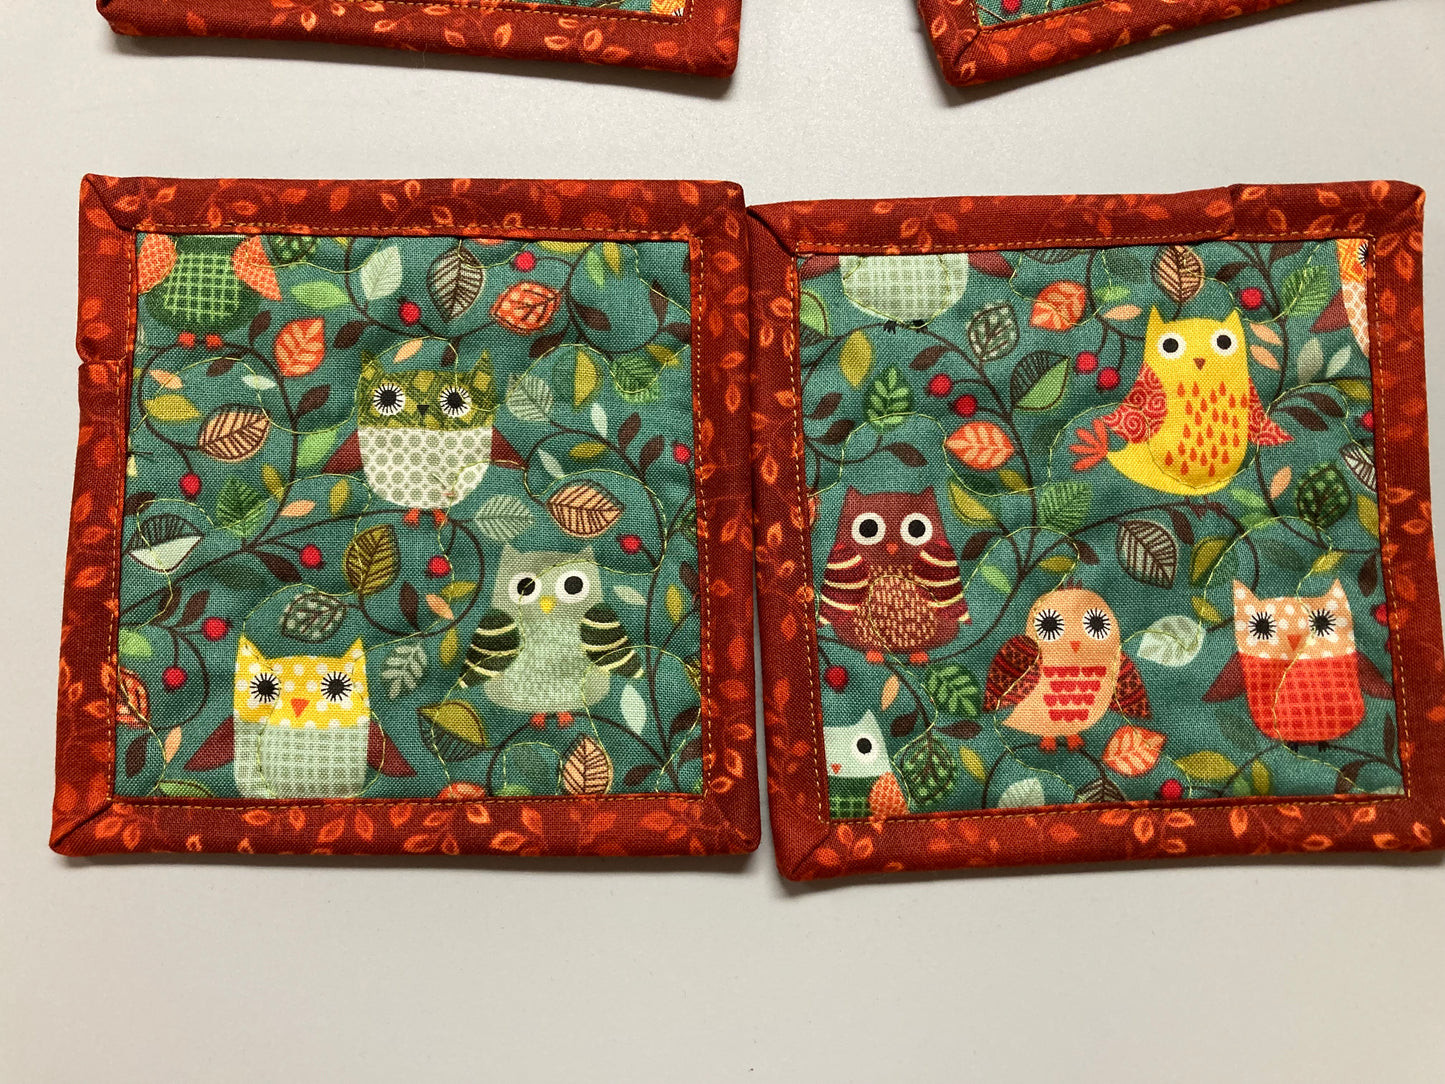 Owl Woodland Animal Fabric Coasters for Drinks, 5x5" Large Coffee Tea Beer Hot Cold Washable Reusable Kid’s Snack Mats, Forest Handmade